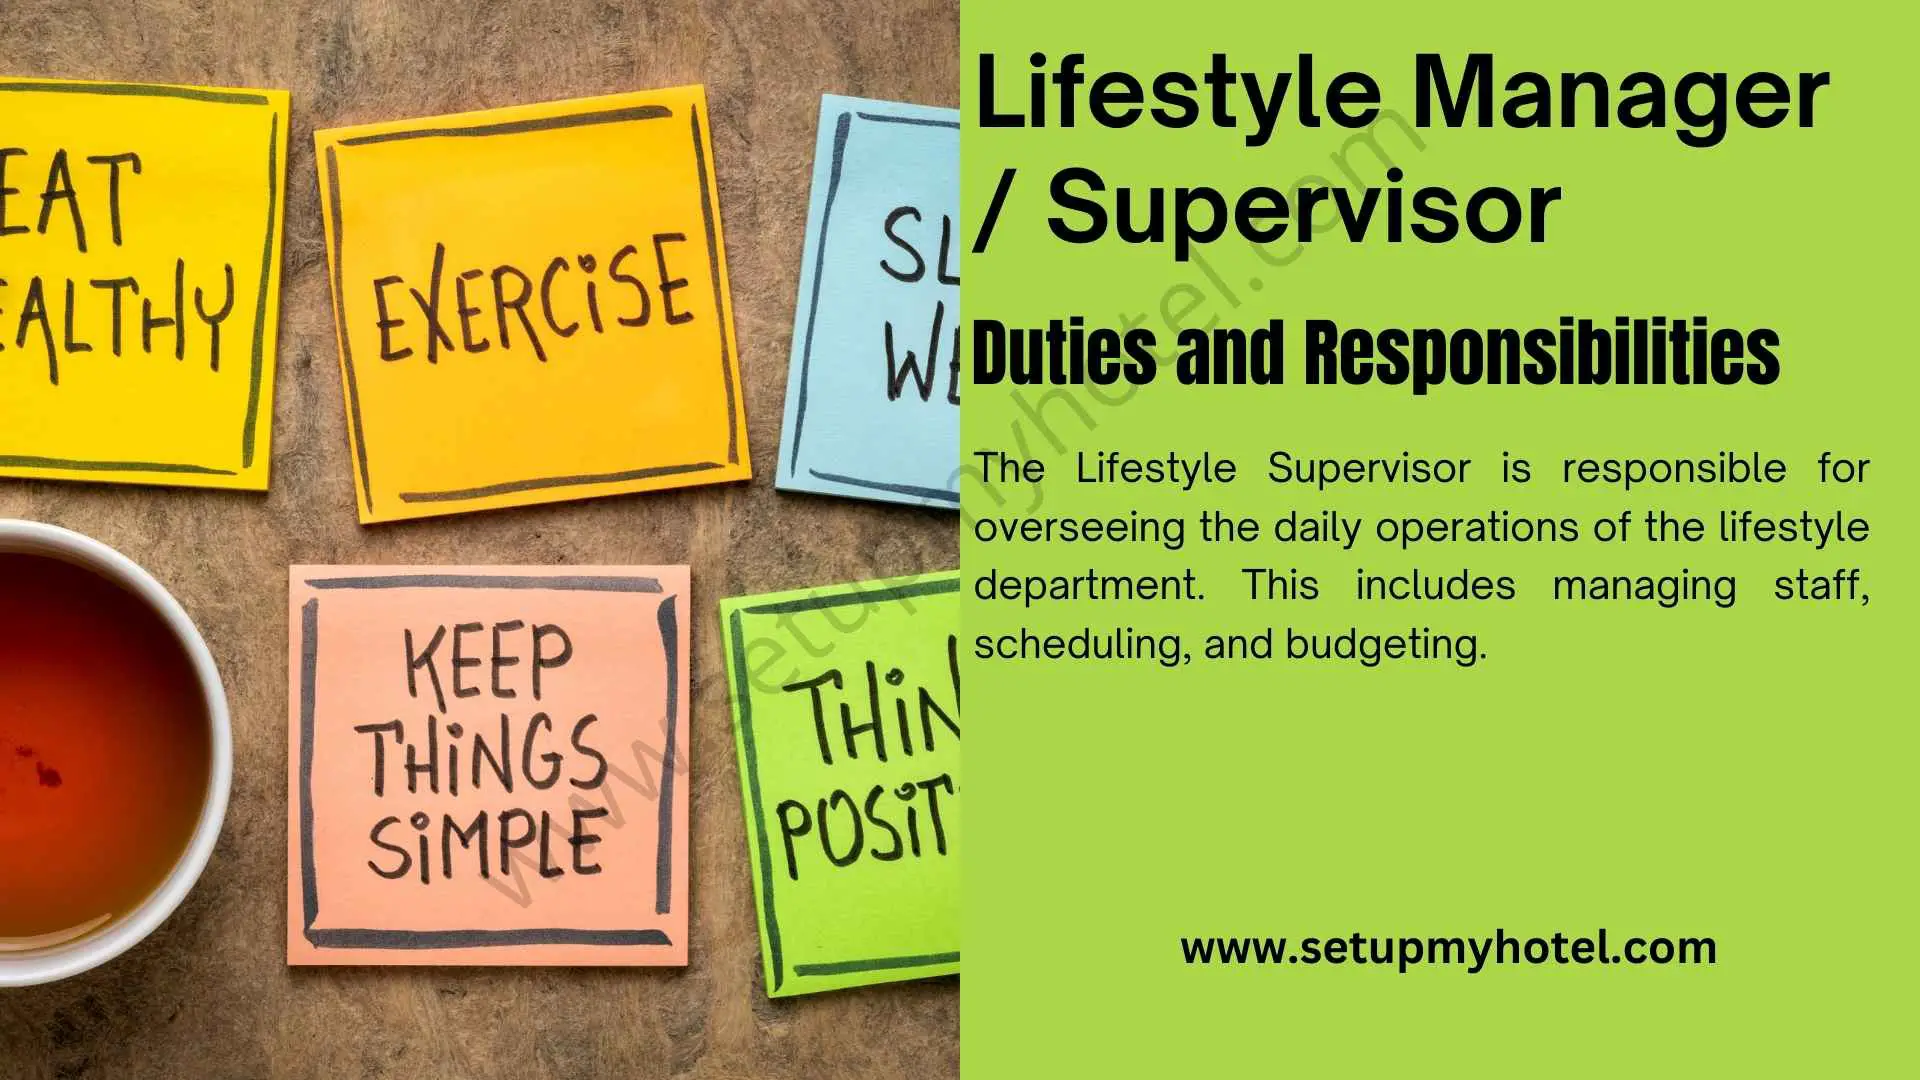 As a Lifestyle Manager/Supervisor, your primary responsibility will be to oversee and coordinate the daily activities of a team of lifestyle specialists. You will also be responsible for ensuring that all lifestyle services provided to clients are of the highest quality and delivered in a timely and efficient manner. In this role, you will need to have excellent organizational skills, as you will be responsible for creating schedules and ensuring that all team members are aware of their responsibilities. You will also need to be an effective communicator, as you will be required to liaise with clients and other stakeholders to ensure that their needs are being met. To be successful in this role, you will need to have a strong background in lifestyle management, with experience in areas such as event planning, personal shopping, and travel coordination. You will also need to be able to work well under pressure and be adaptable to changing circumstances. In return for your hard work and dedication, you can expect a competitive salary and benefits package, as well as the opportunity to work with a dynamic and talented team of professionals. So if you are looking for a challenging and rewarding career in lifestyle management, we would love to hear from you.